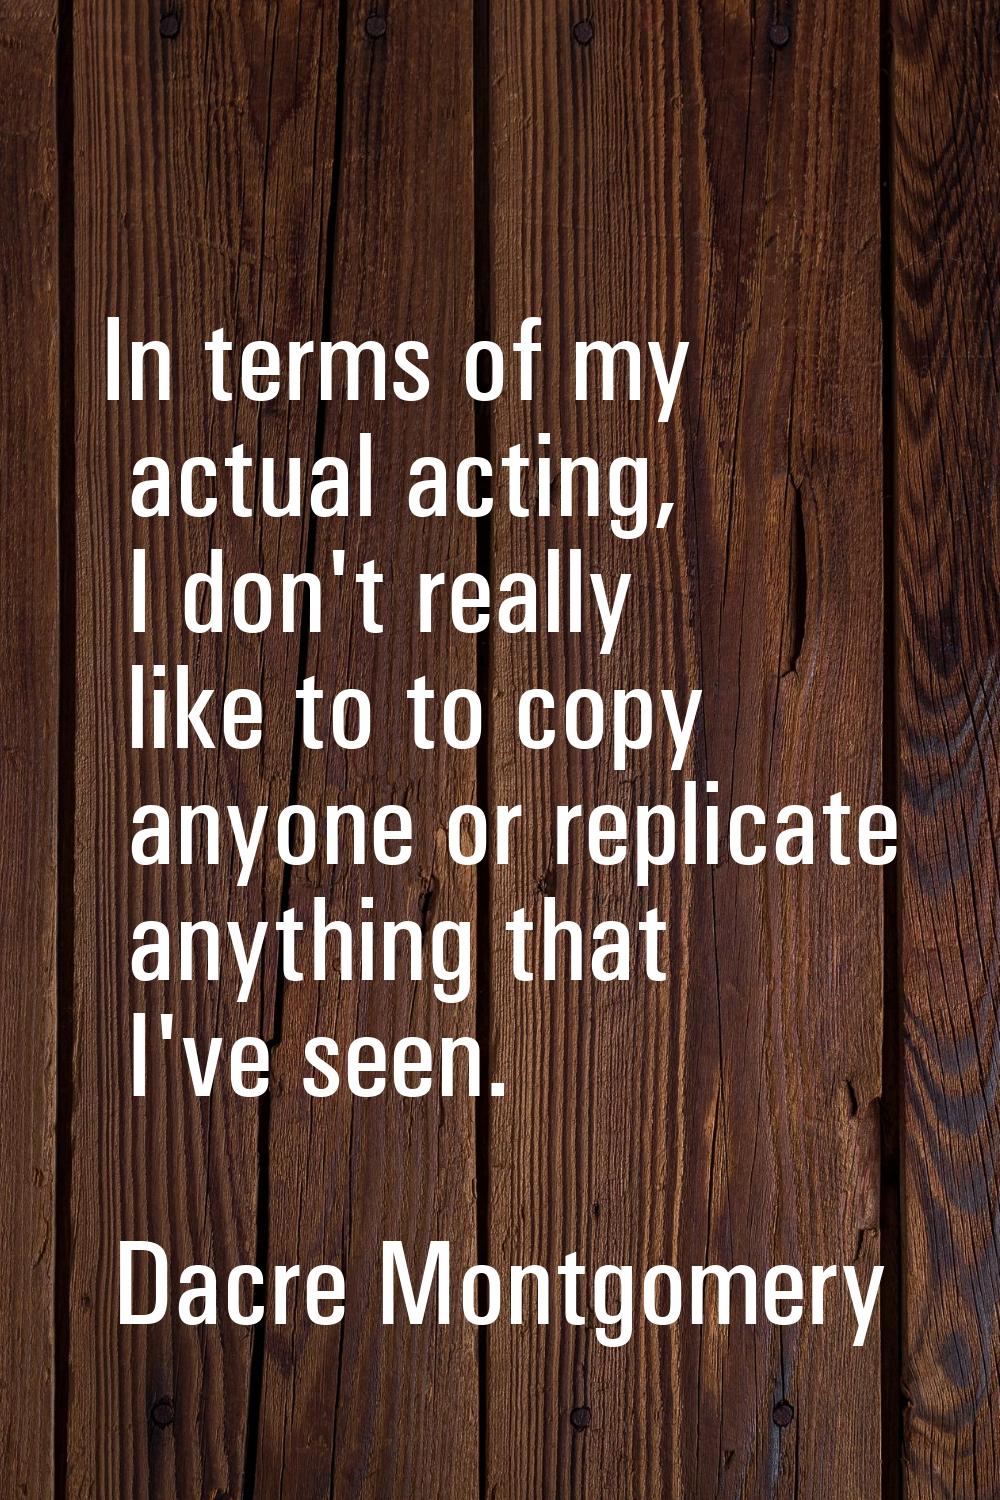 In terms of my actual acting, I don't really like to to copy anyone or replicate anything that I've